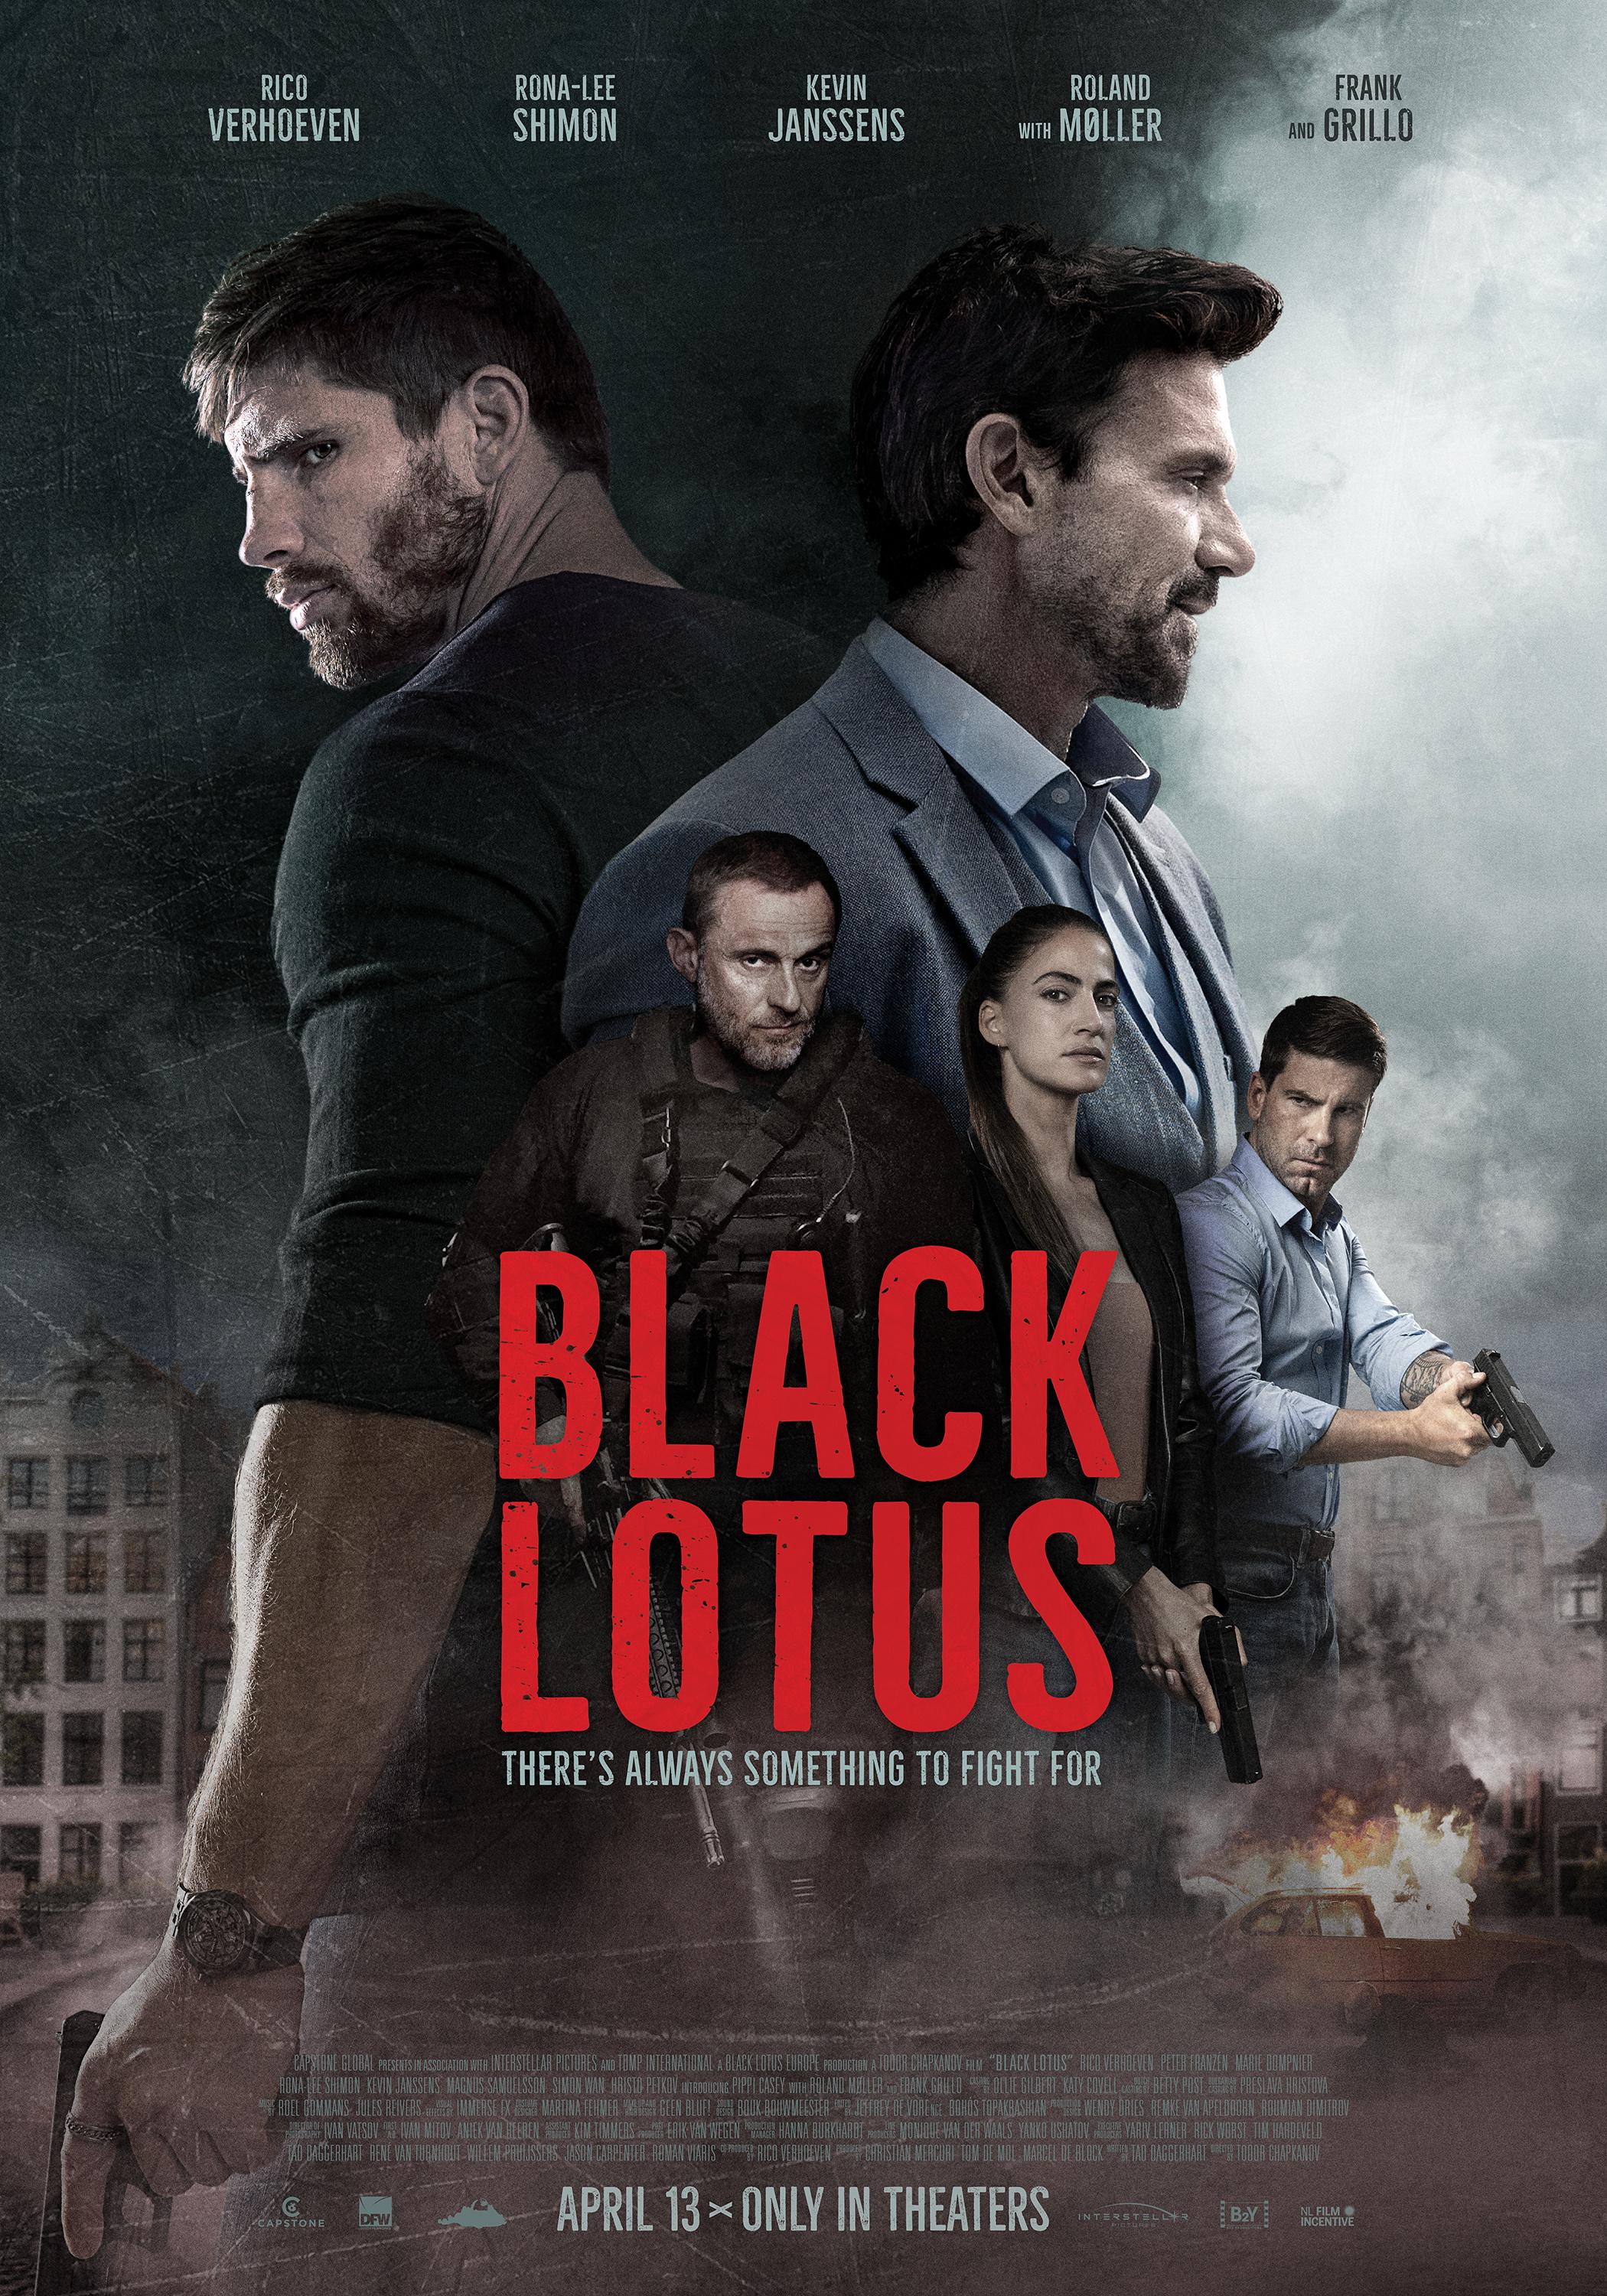 Black Lotus (Lionsgate Play Film): In this gripping Lionsgate Play film, an ex-soldier finds himself entangled in a dangerous situation when he uncovers the abduction of his late friend's daughter. Fueled by determination, he sets out on a thrilling mission to rescue her from the clutches of a notorious criminal underboss, portrayed by the talented Frank Grillo.